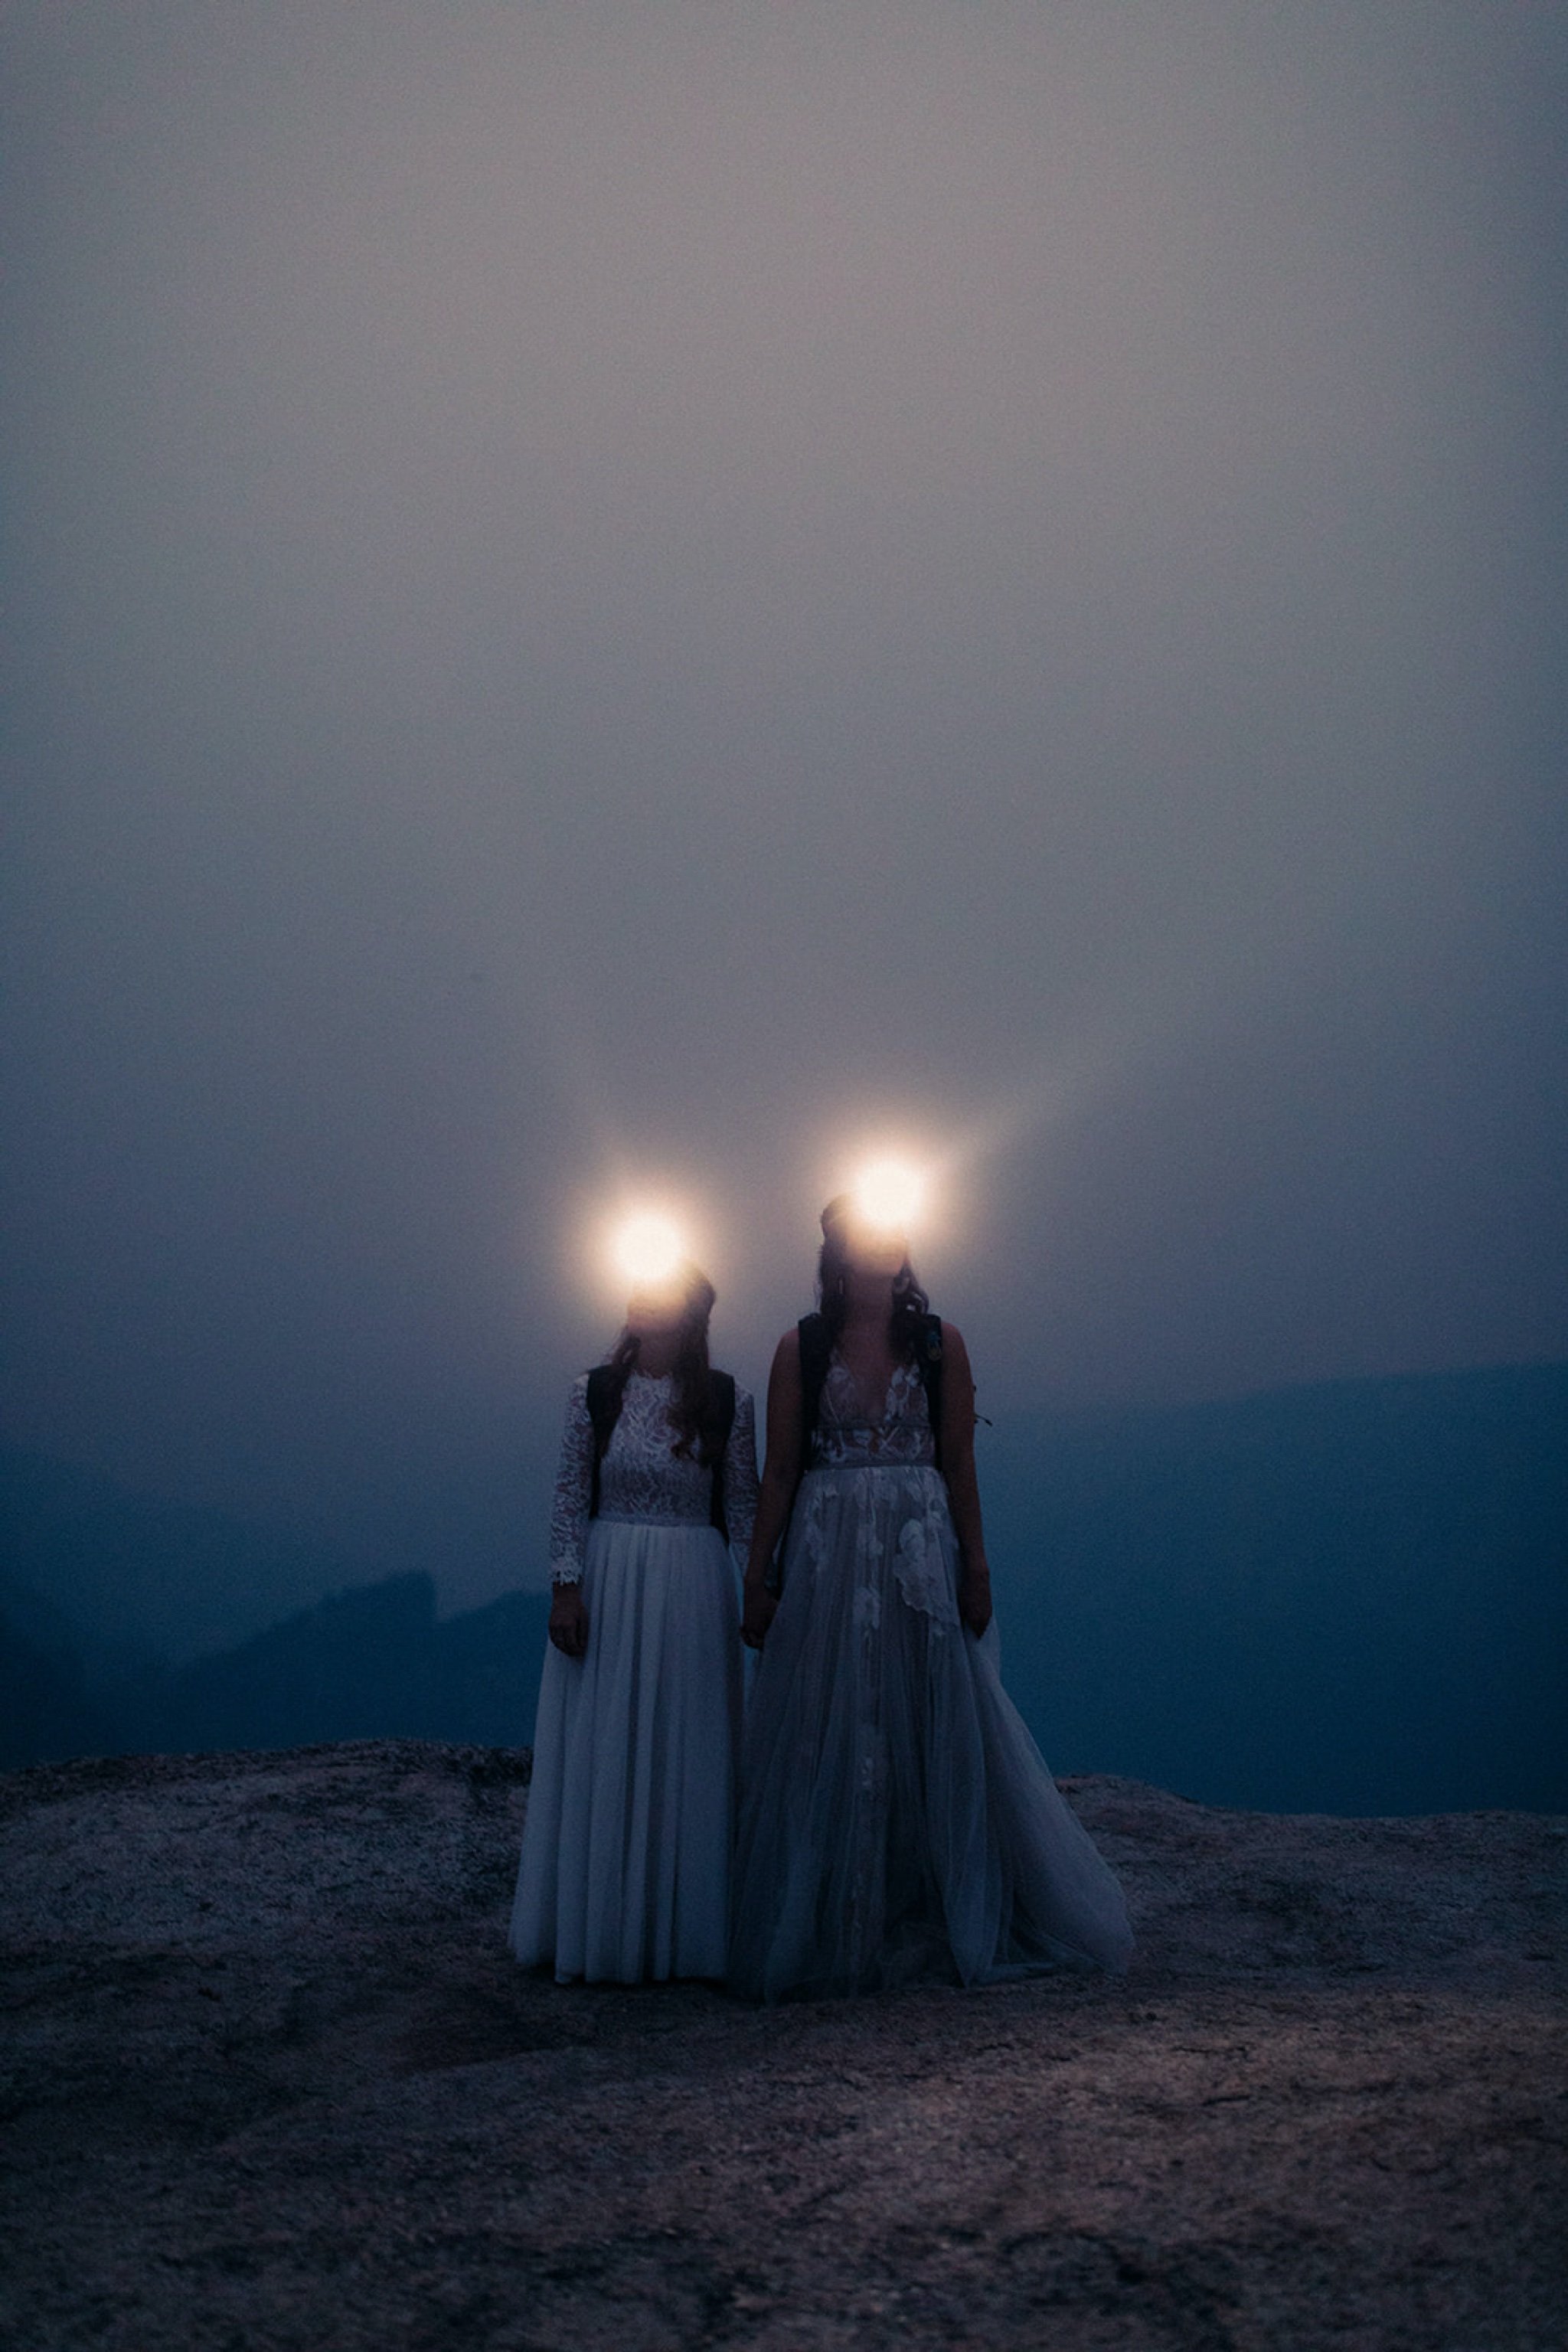 Yosemite National Park Elopement with Two Brides-Will Khoury56.jpg